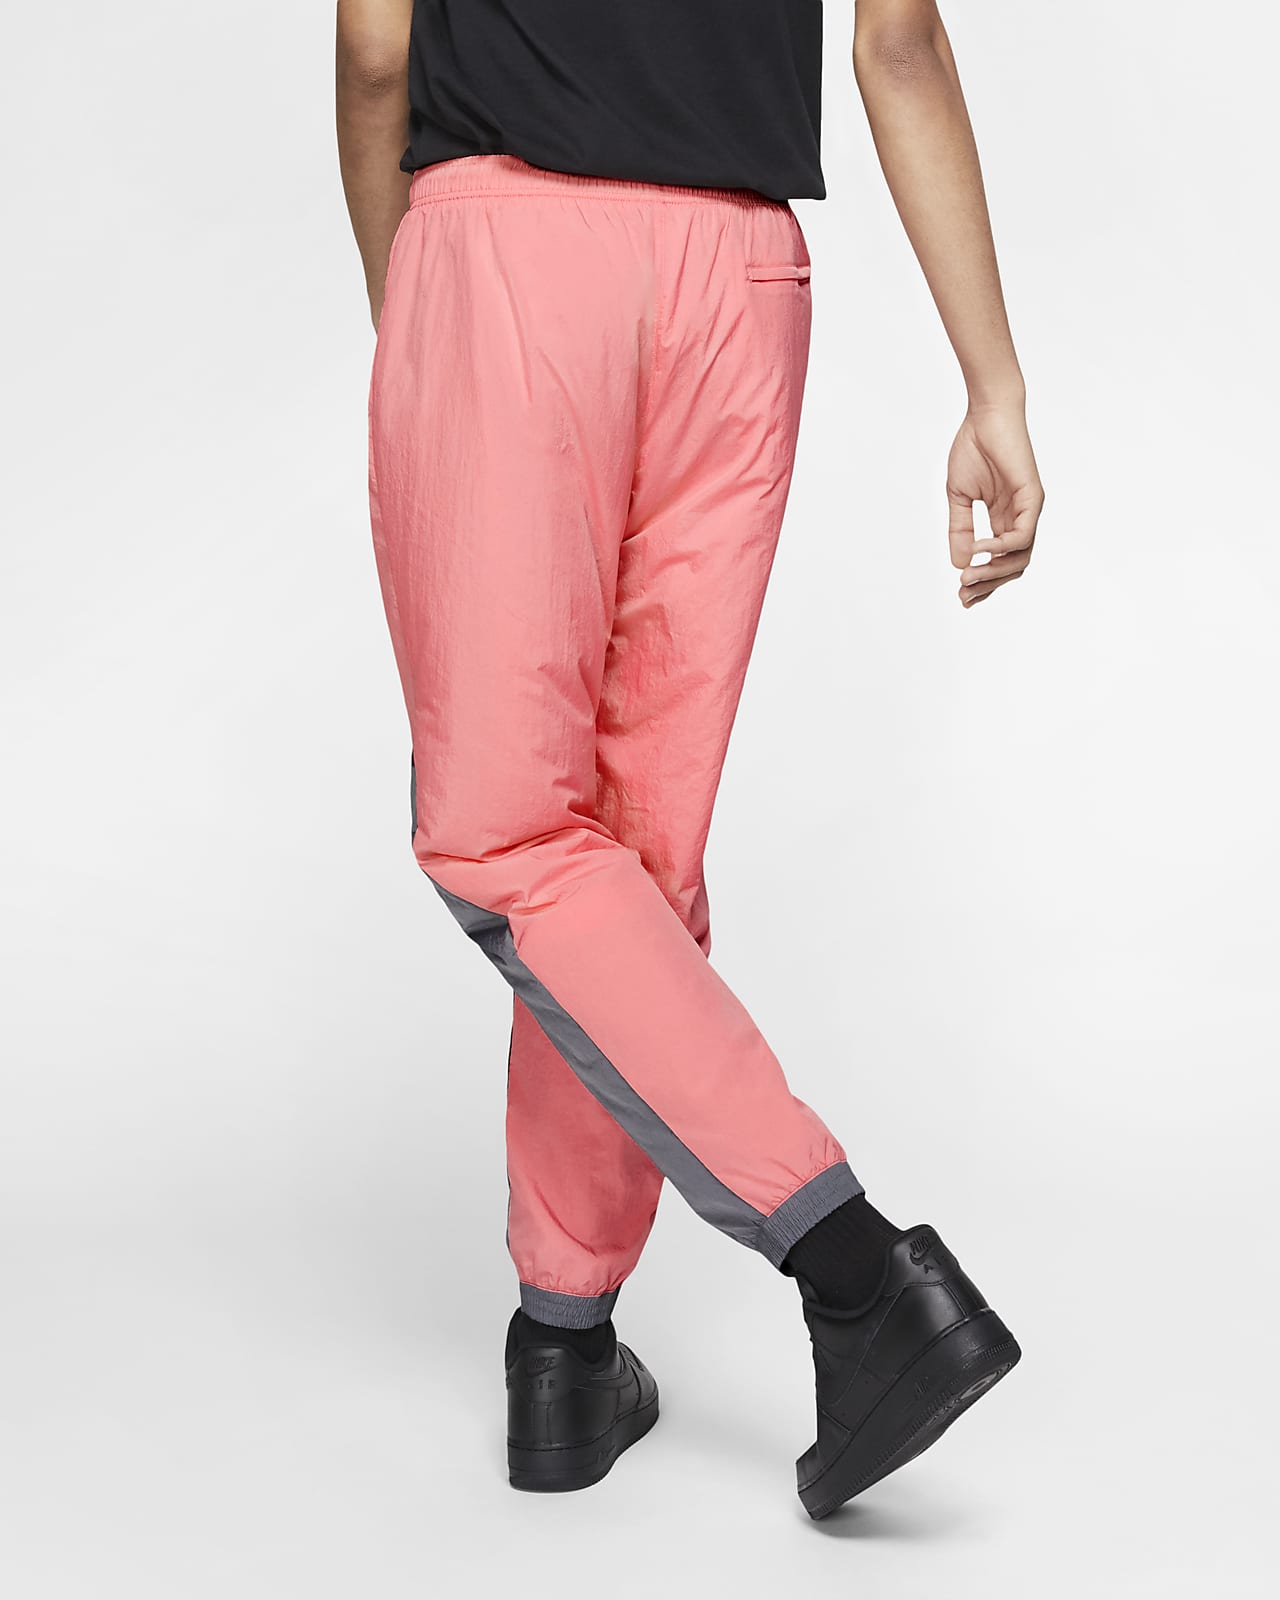 https://static.nike.com/a/images/t_PDP_1280_v1/f_auto,q_auto:eco/tb2ml2vgxsrxz9r8fwca/sportswear-woven-trousers-k9nTf2.png